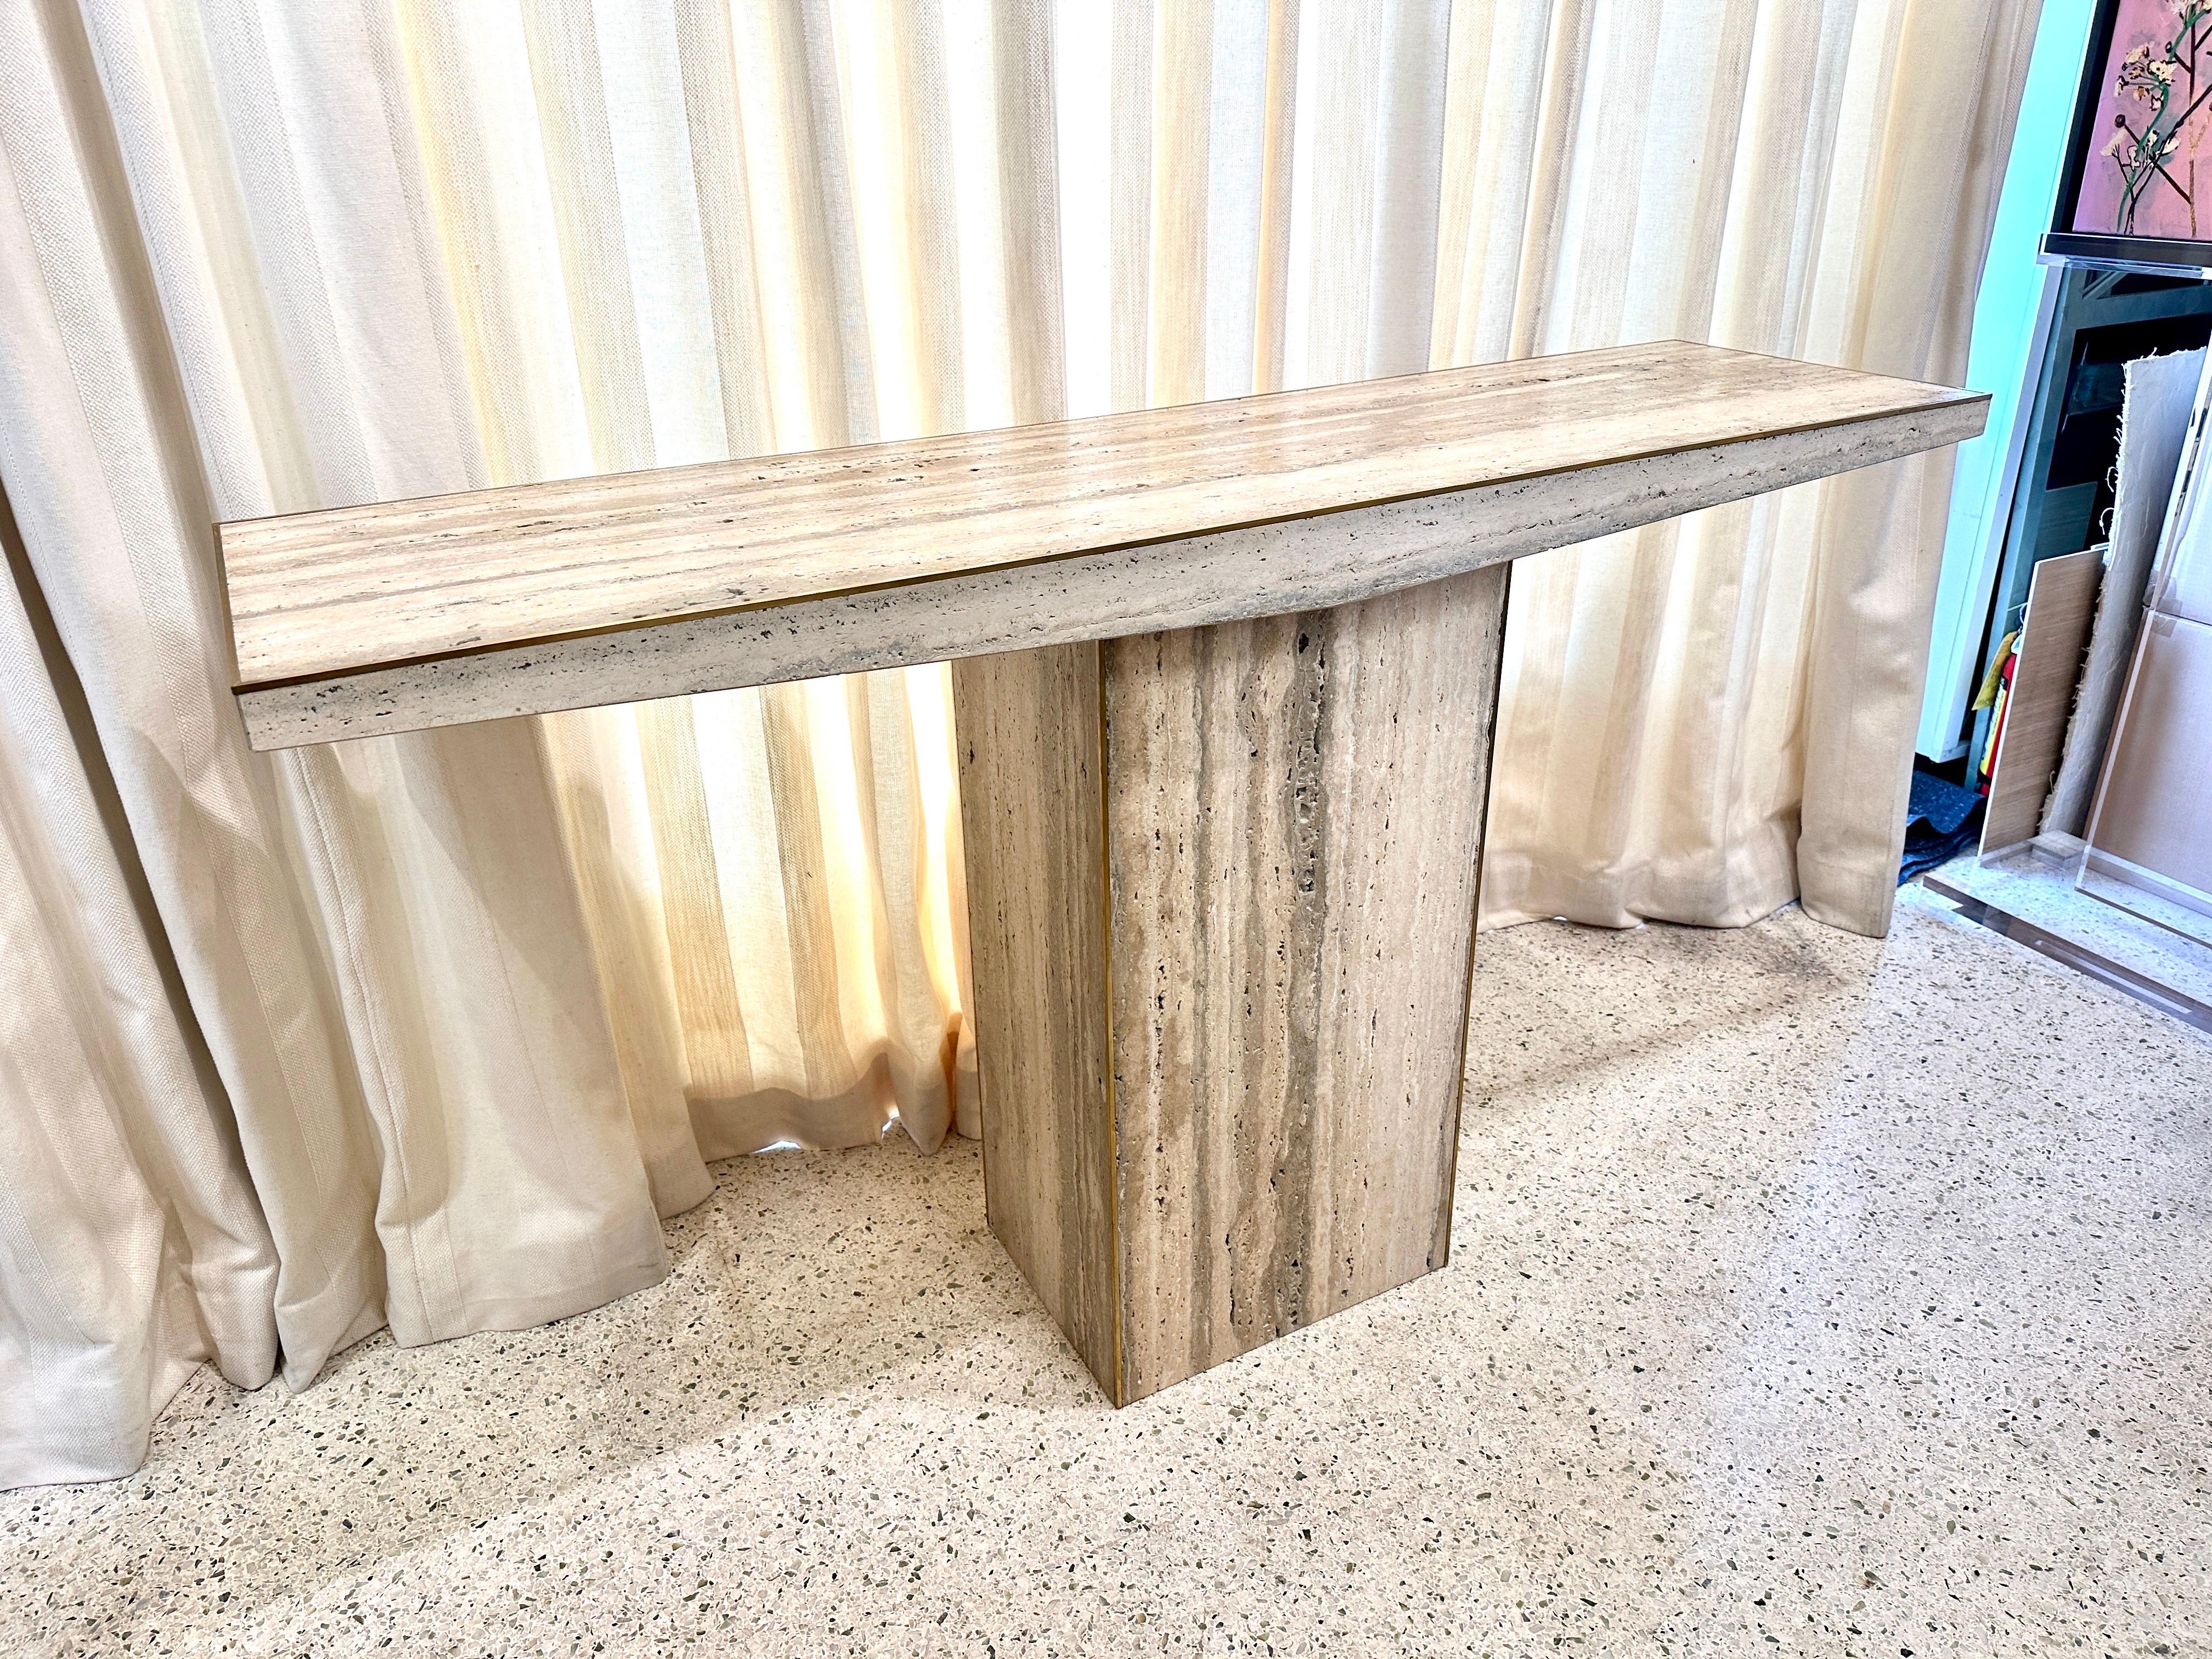 We have TWO wonderful Italian unfilled travertine console tables with a thin decorative brass trim around top and base.  Geometric design, simple and elegant.